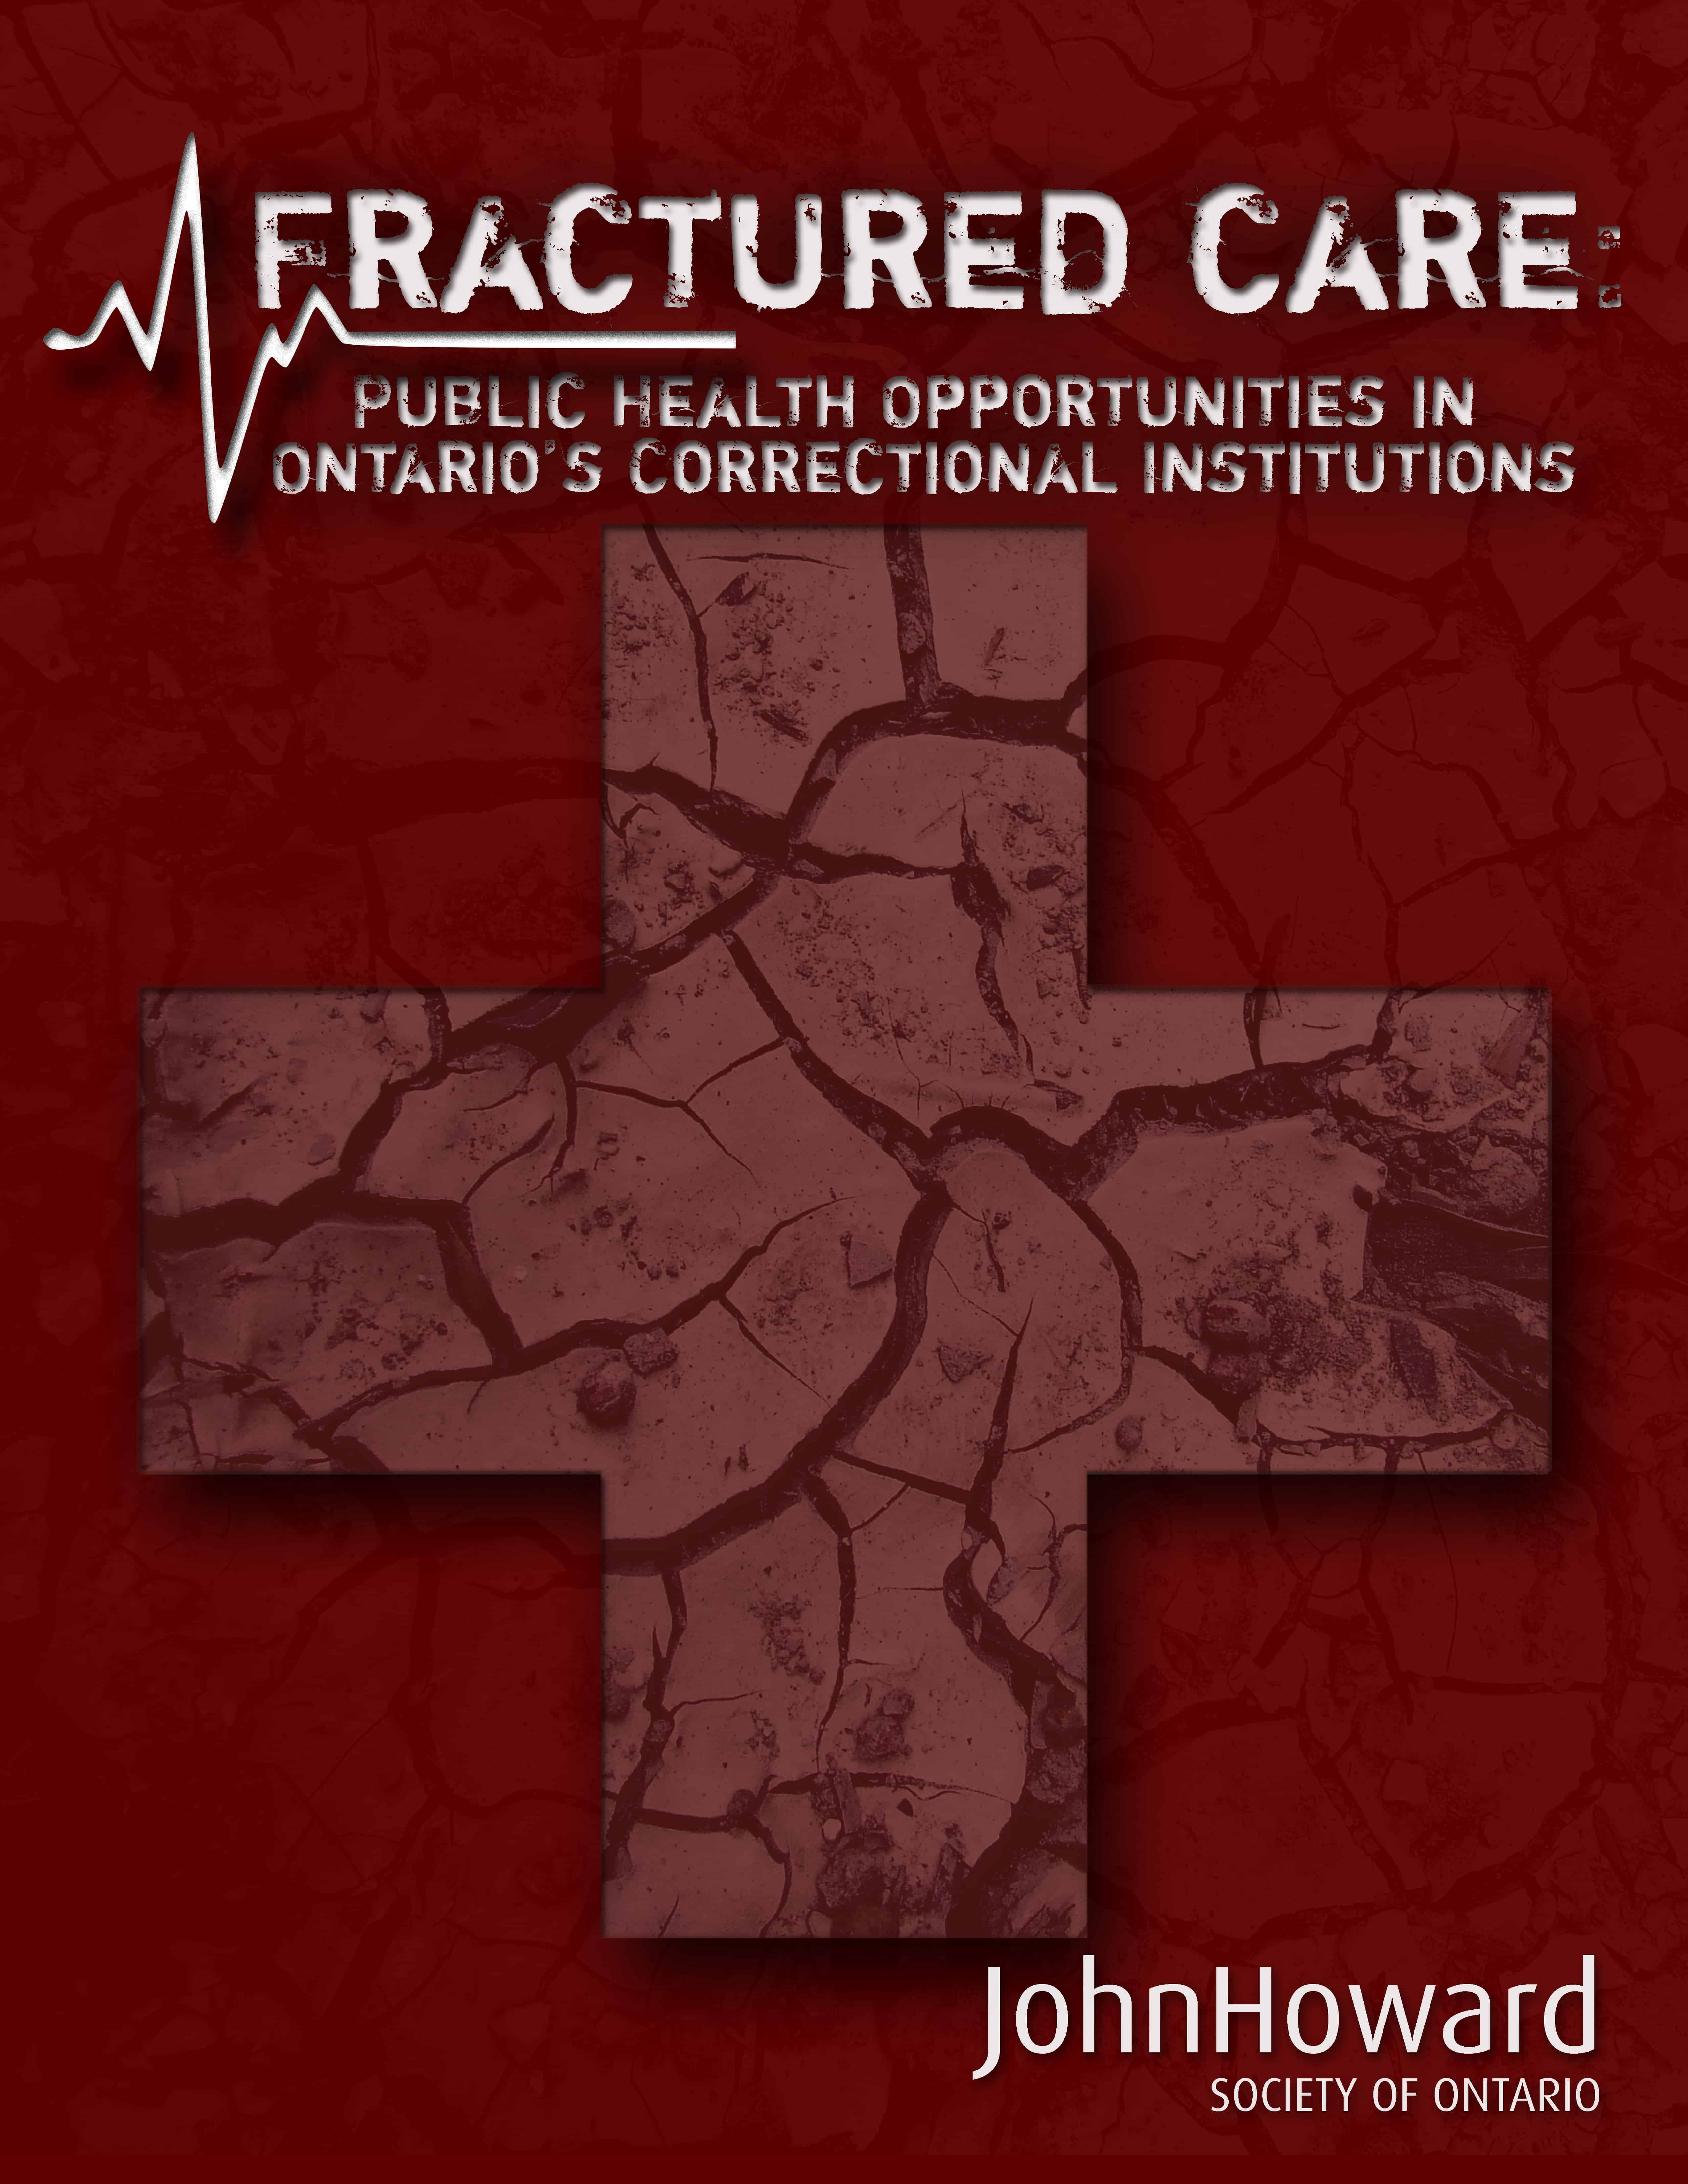 Cover of fractured care report with a faint red cracked cross